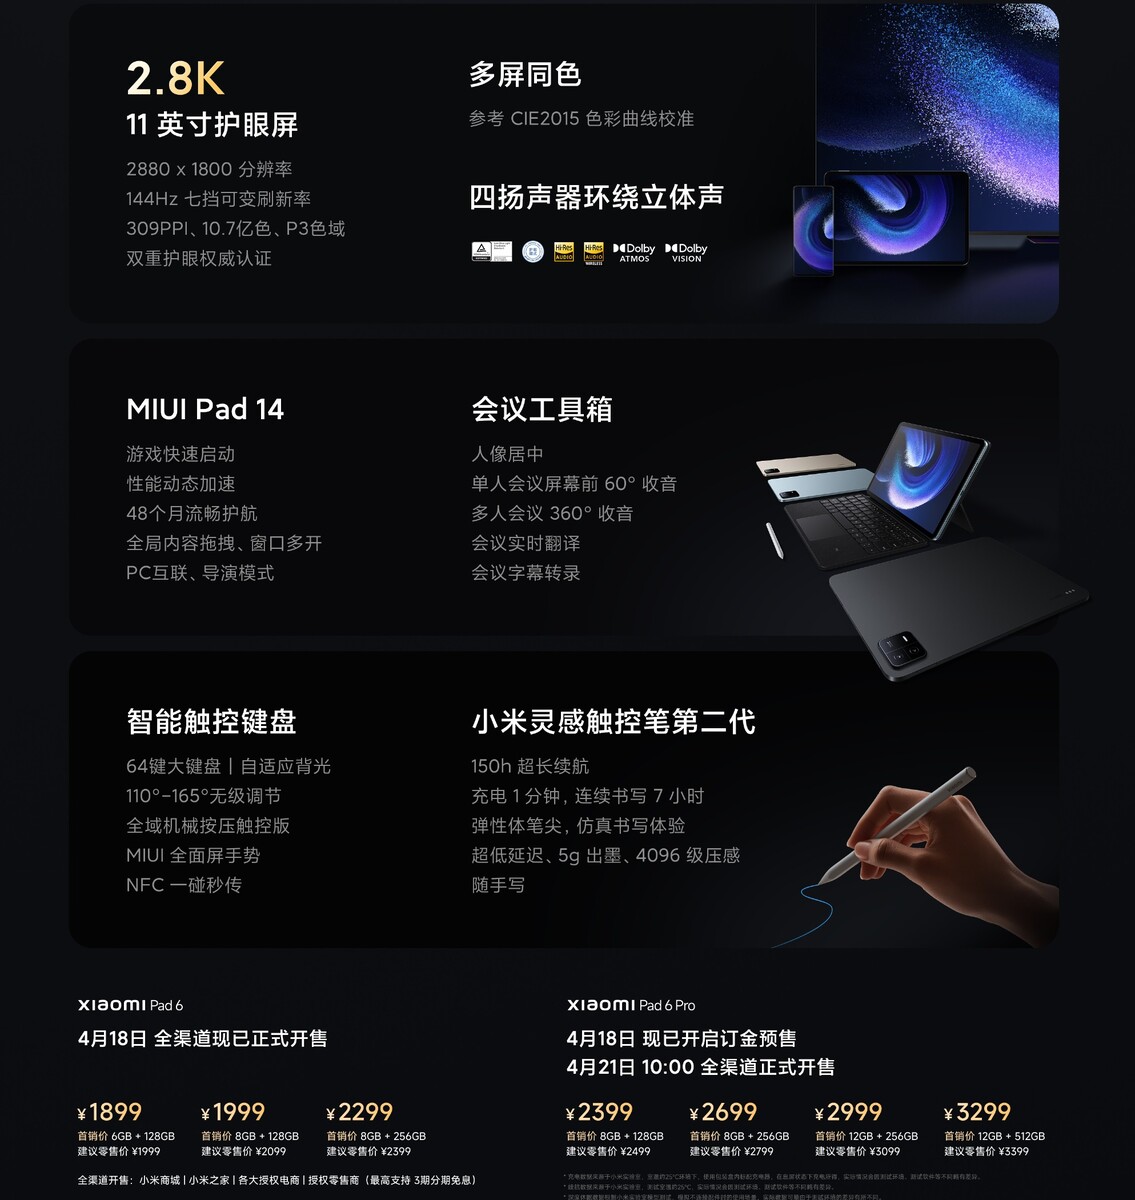 Xiaomi Pad 6 Max Set to Launch on August 14; Design, Specifications Teased